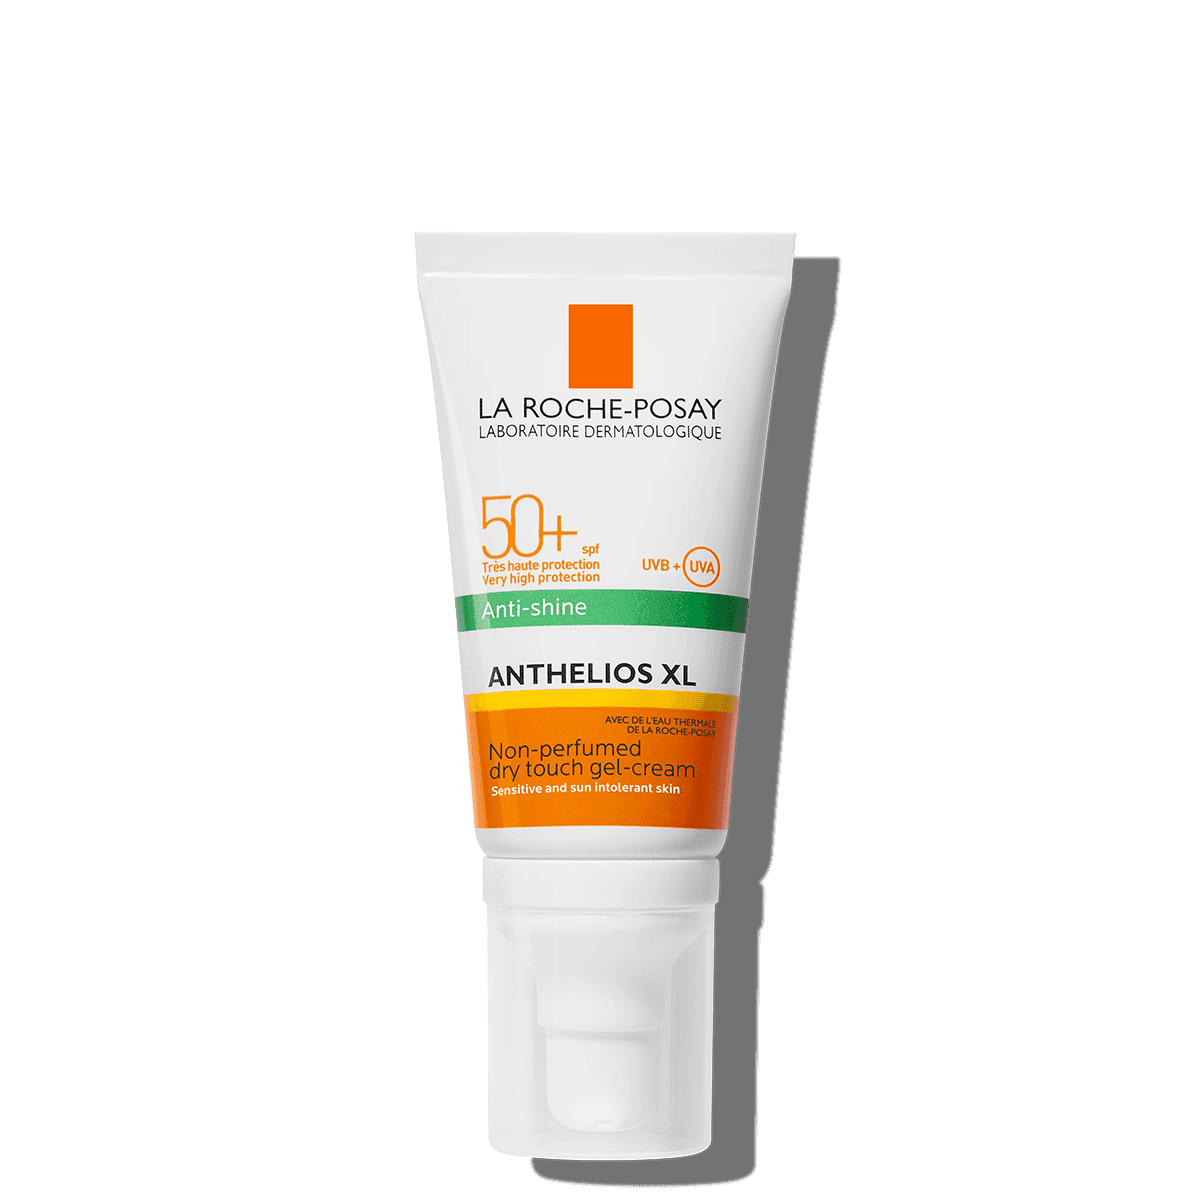 Anthelios XL Non-Perfumed Dry Touch Gel Cream SPF50+